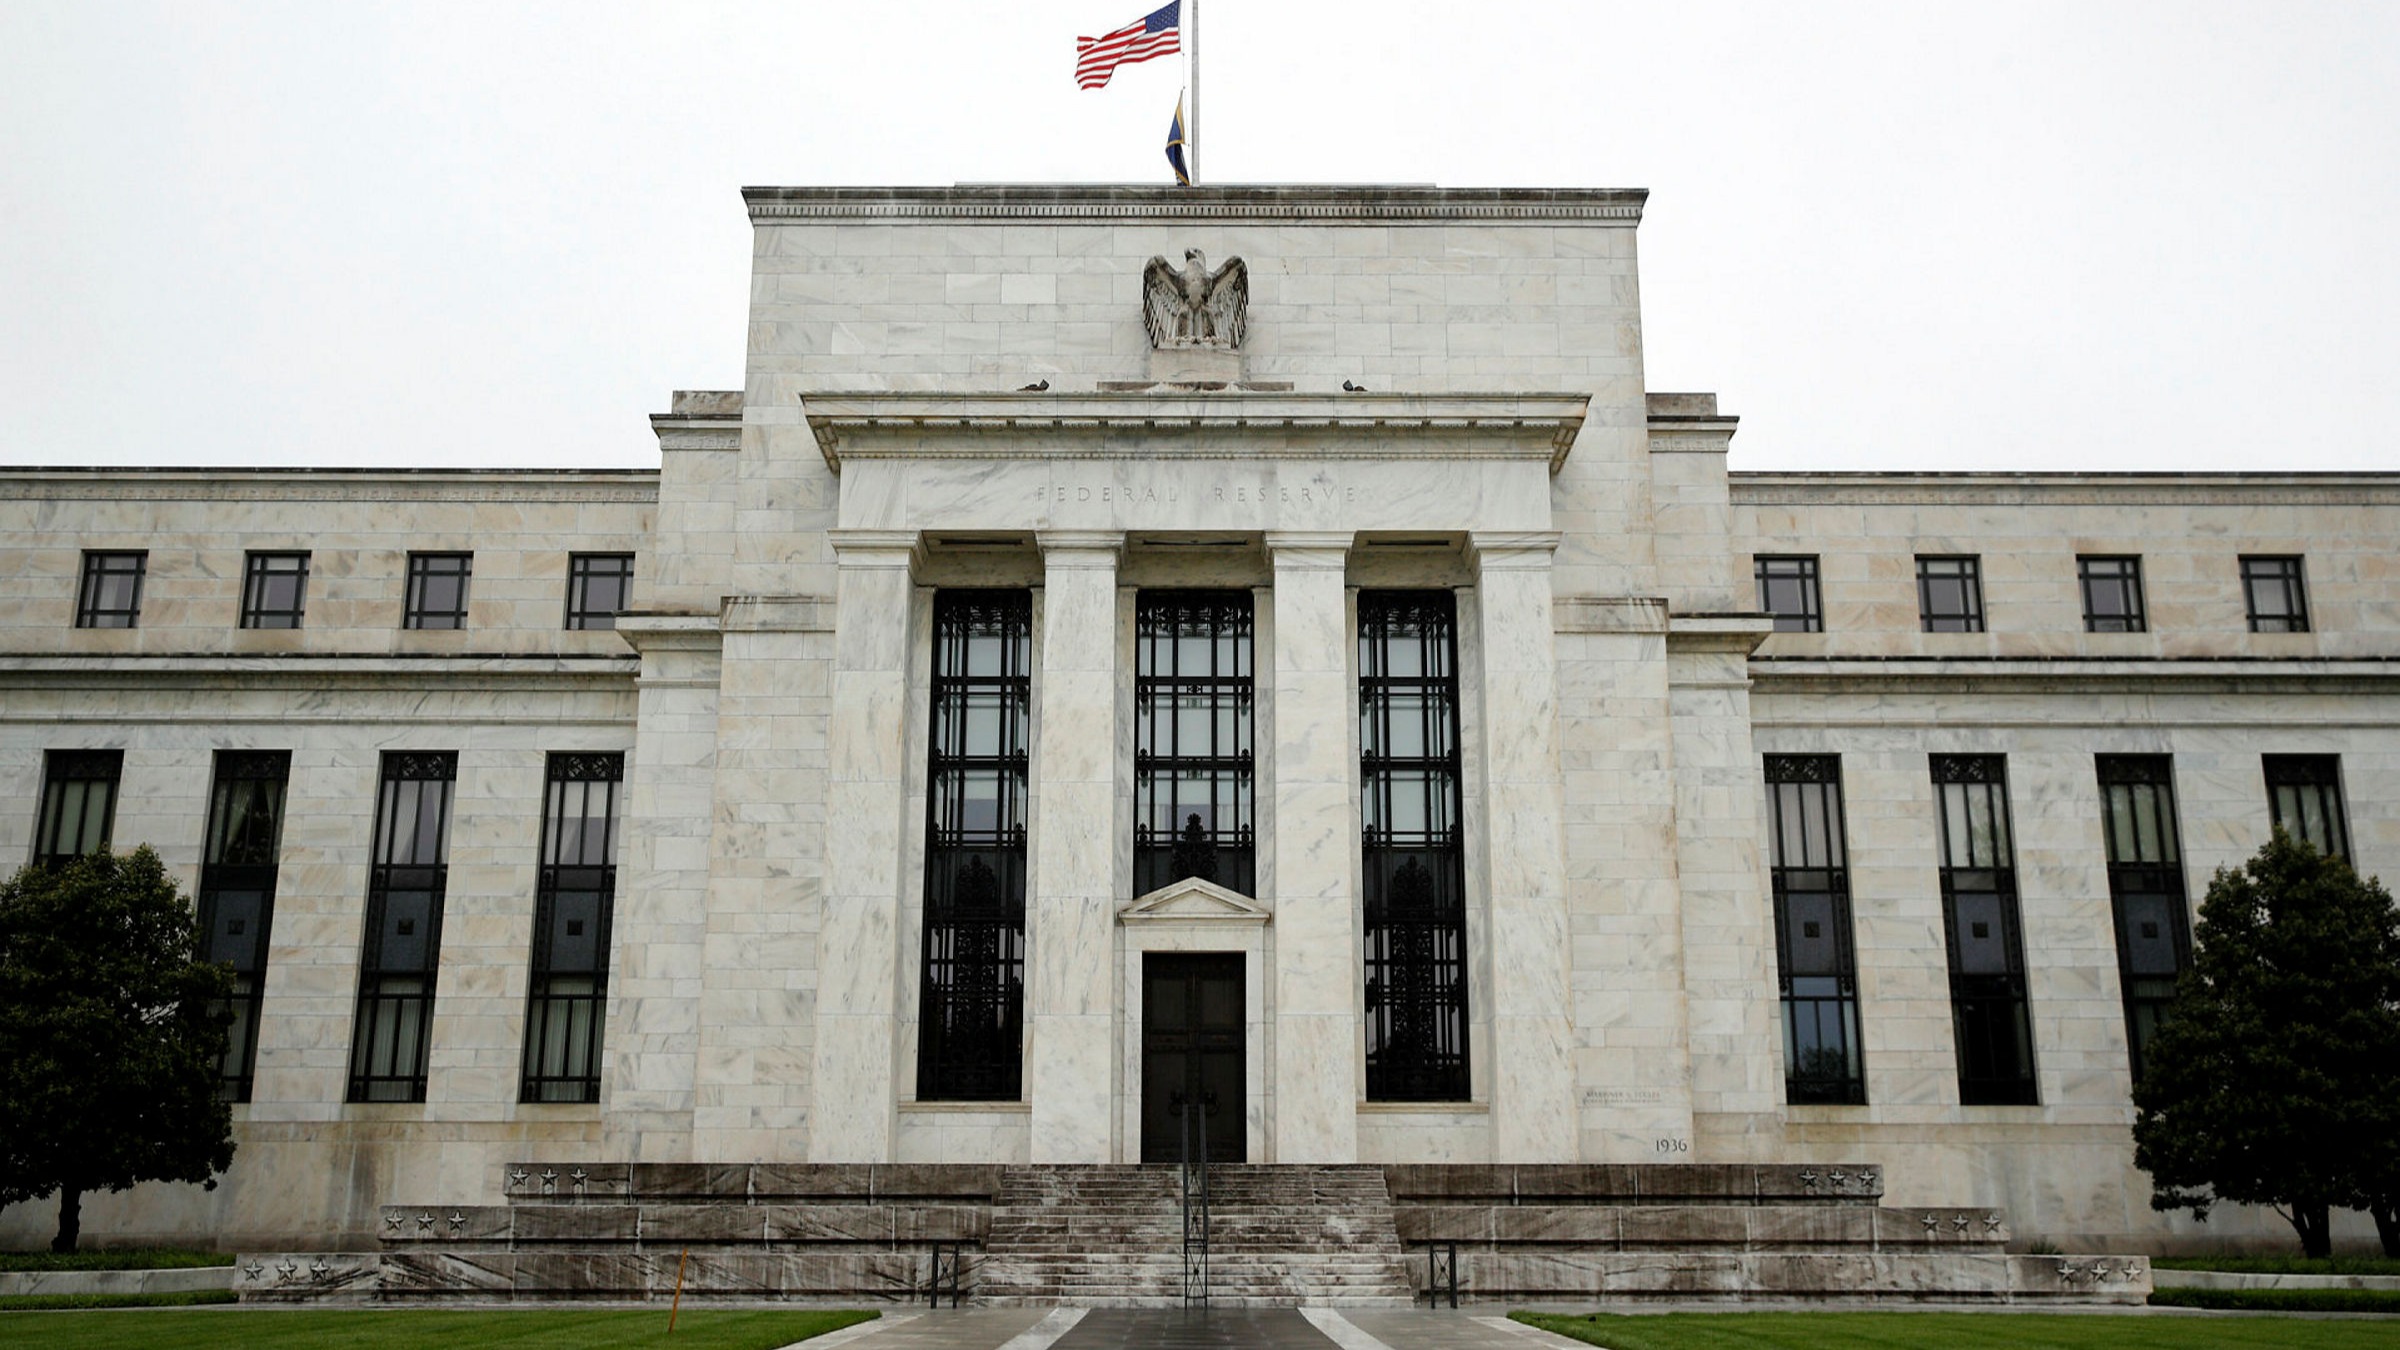 Federal Reserve - Central bank of the US